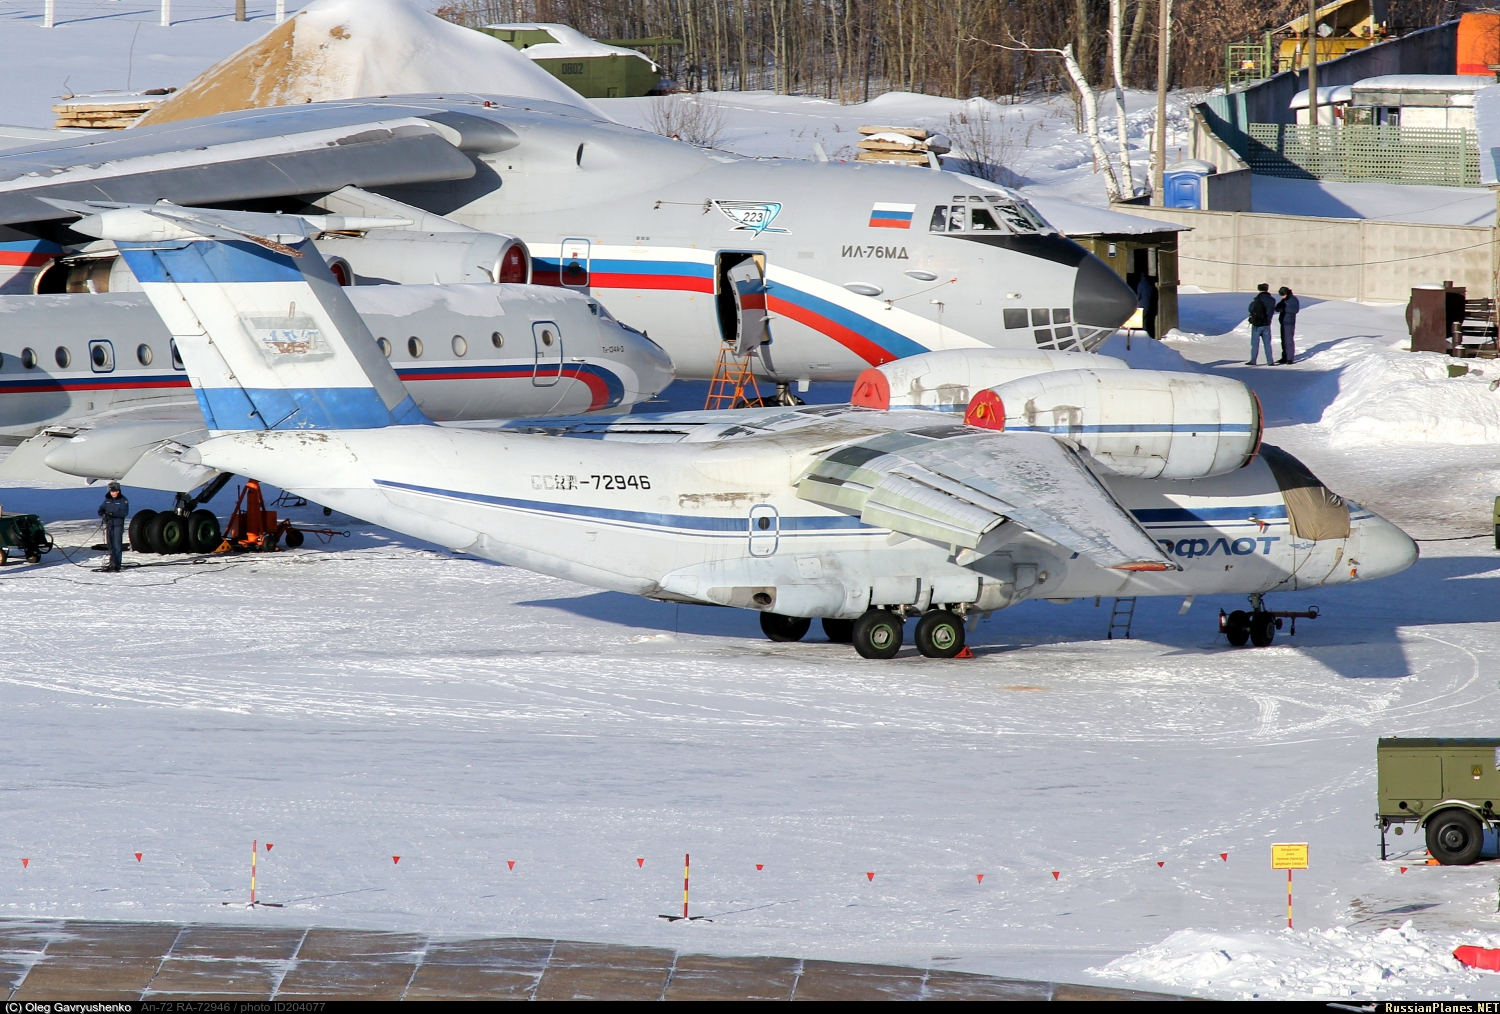 http://russianplanes.net/images/to205000/204077.jpg